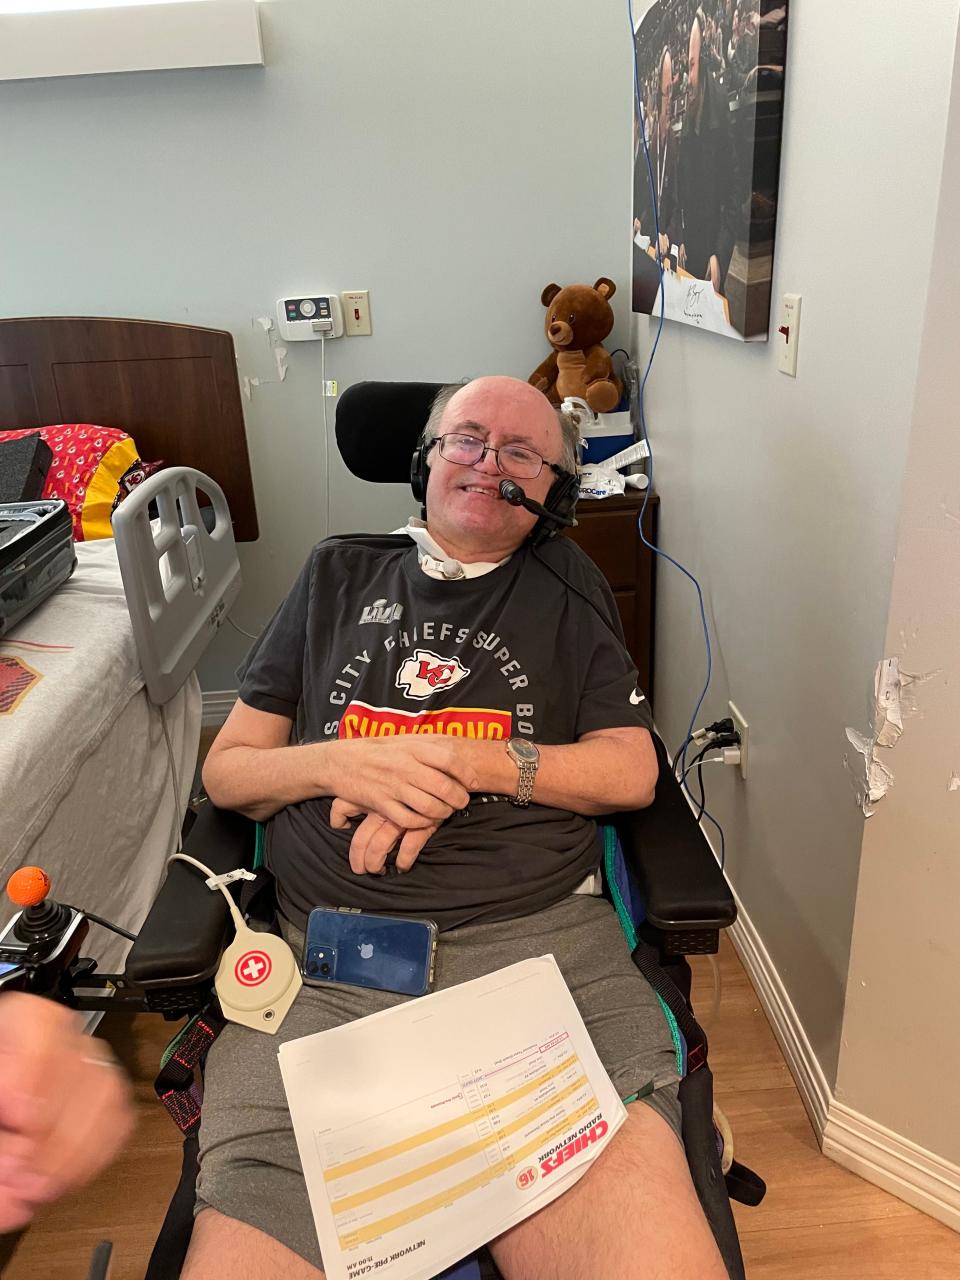 Art Hains sitting in his motorized wheelchair at the Springfield Rehabilitation and Health Center ready for his gameday studio host duties for the Kansas City Chiefs.